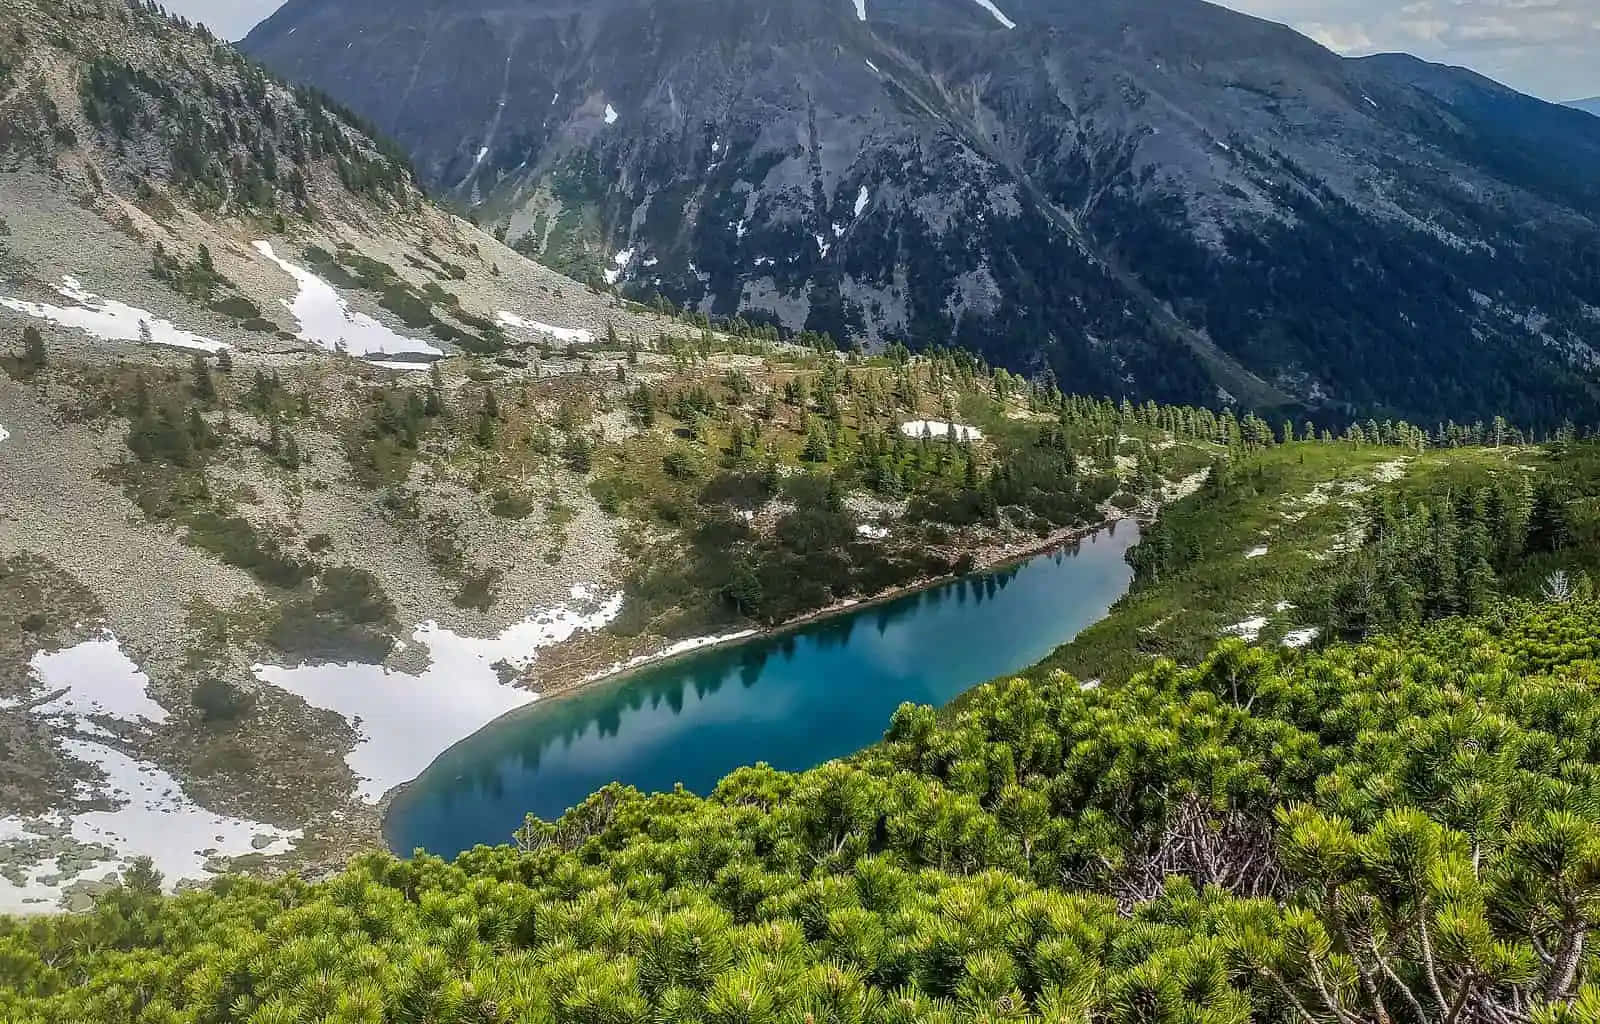 A Lake In The Mountains With Trees Surrounding It